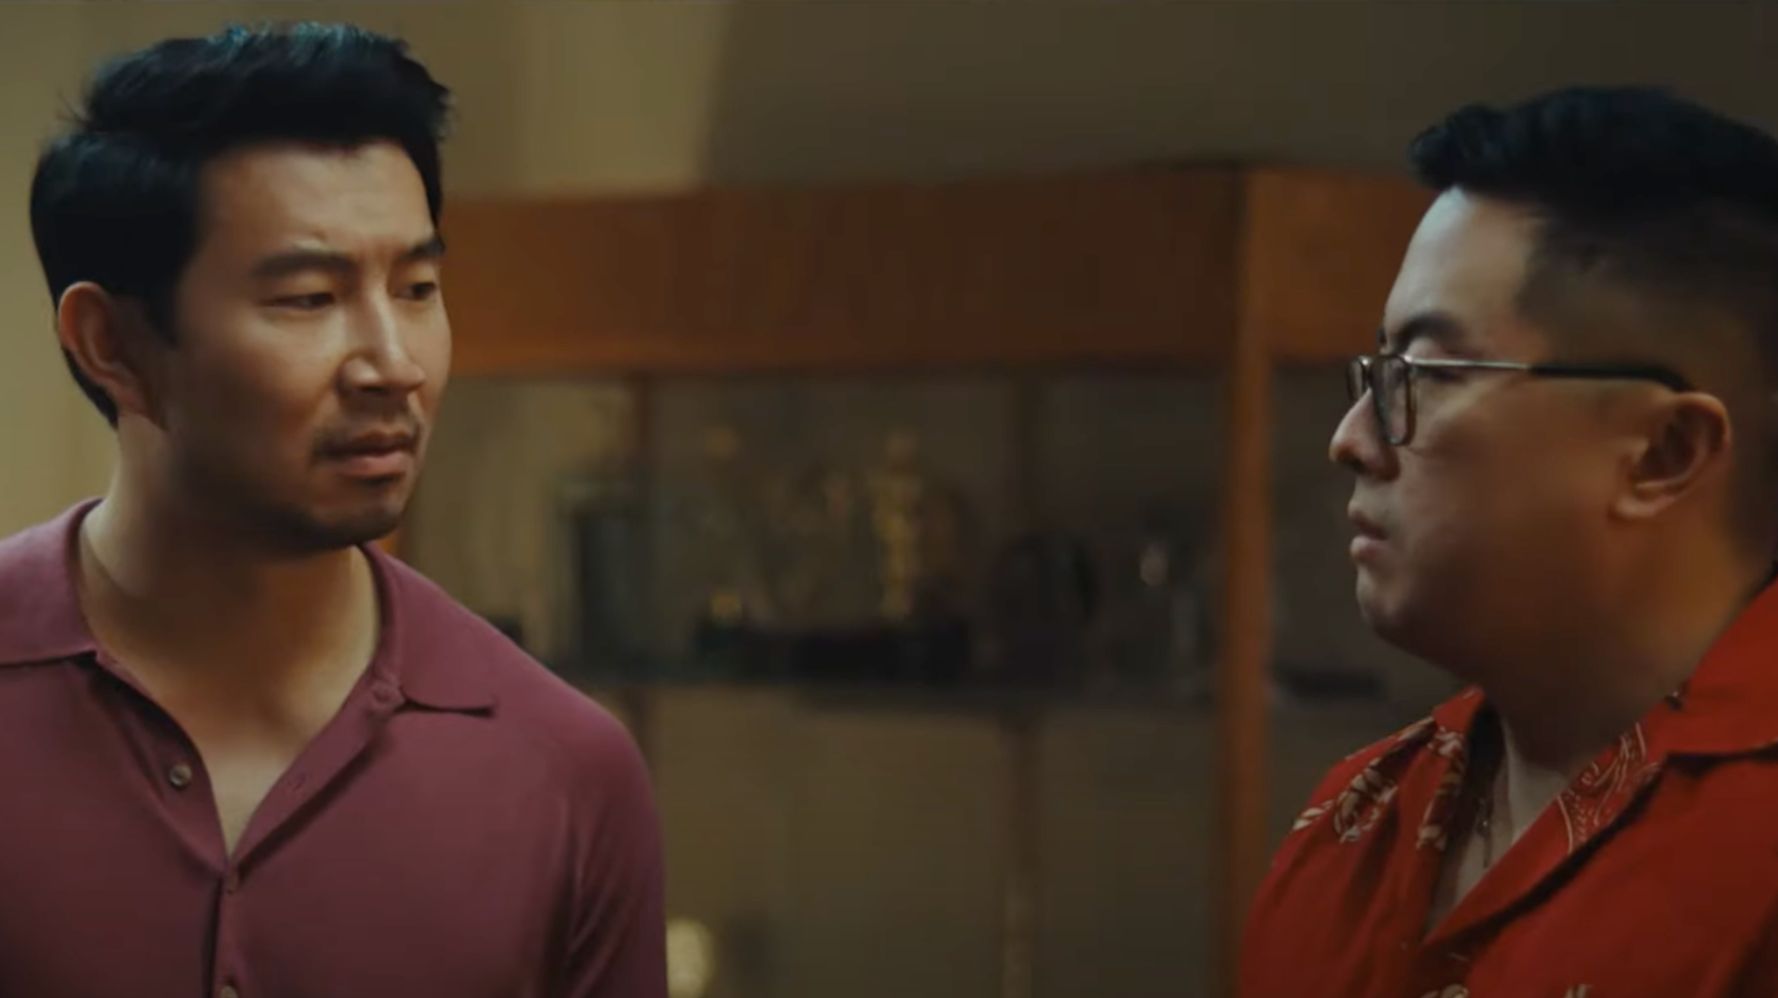 Simu Liu And Bowen Yang Compete To Be 'First Asian' Everything In 'SNL' Sketch - HuffPost